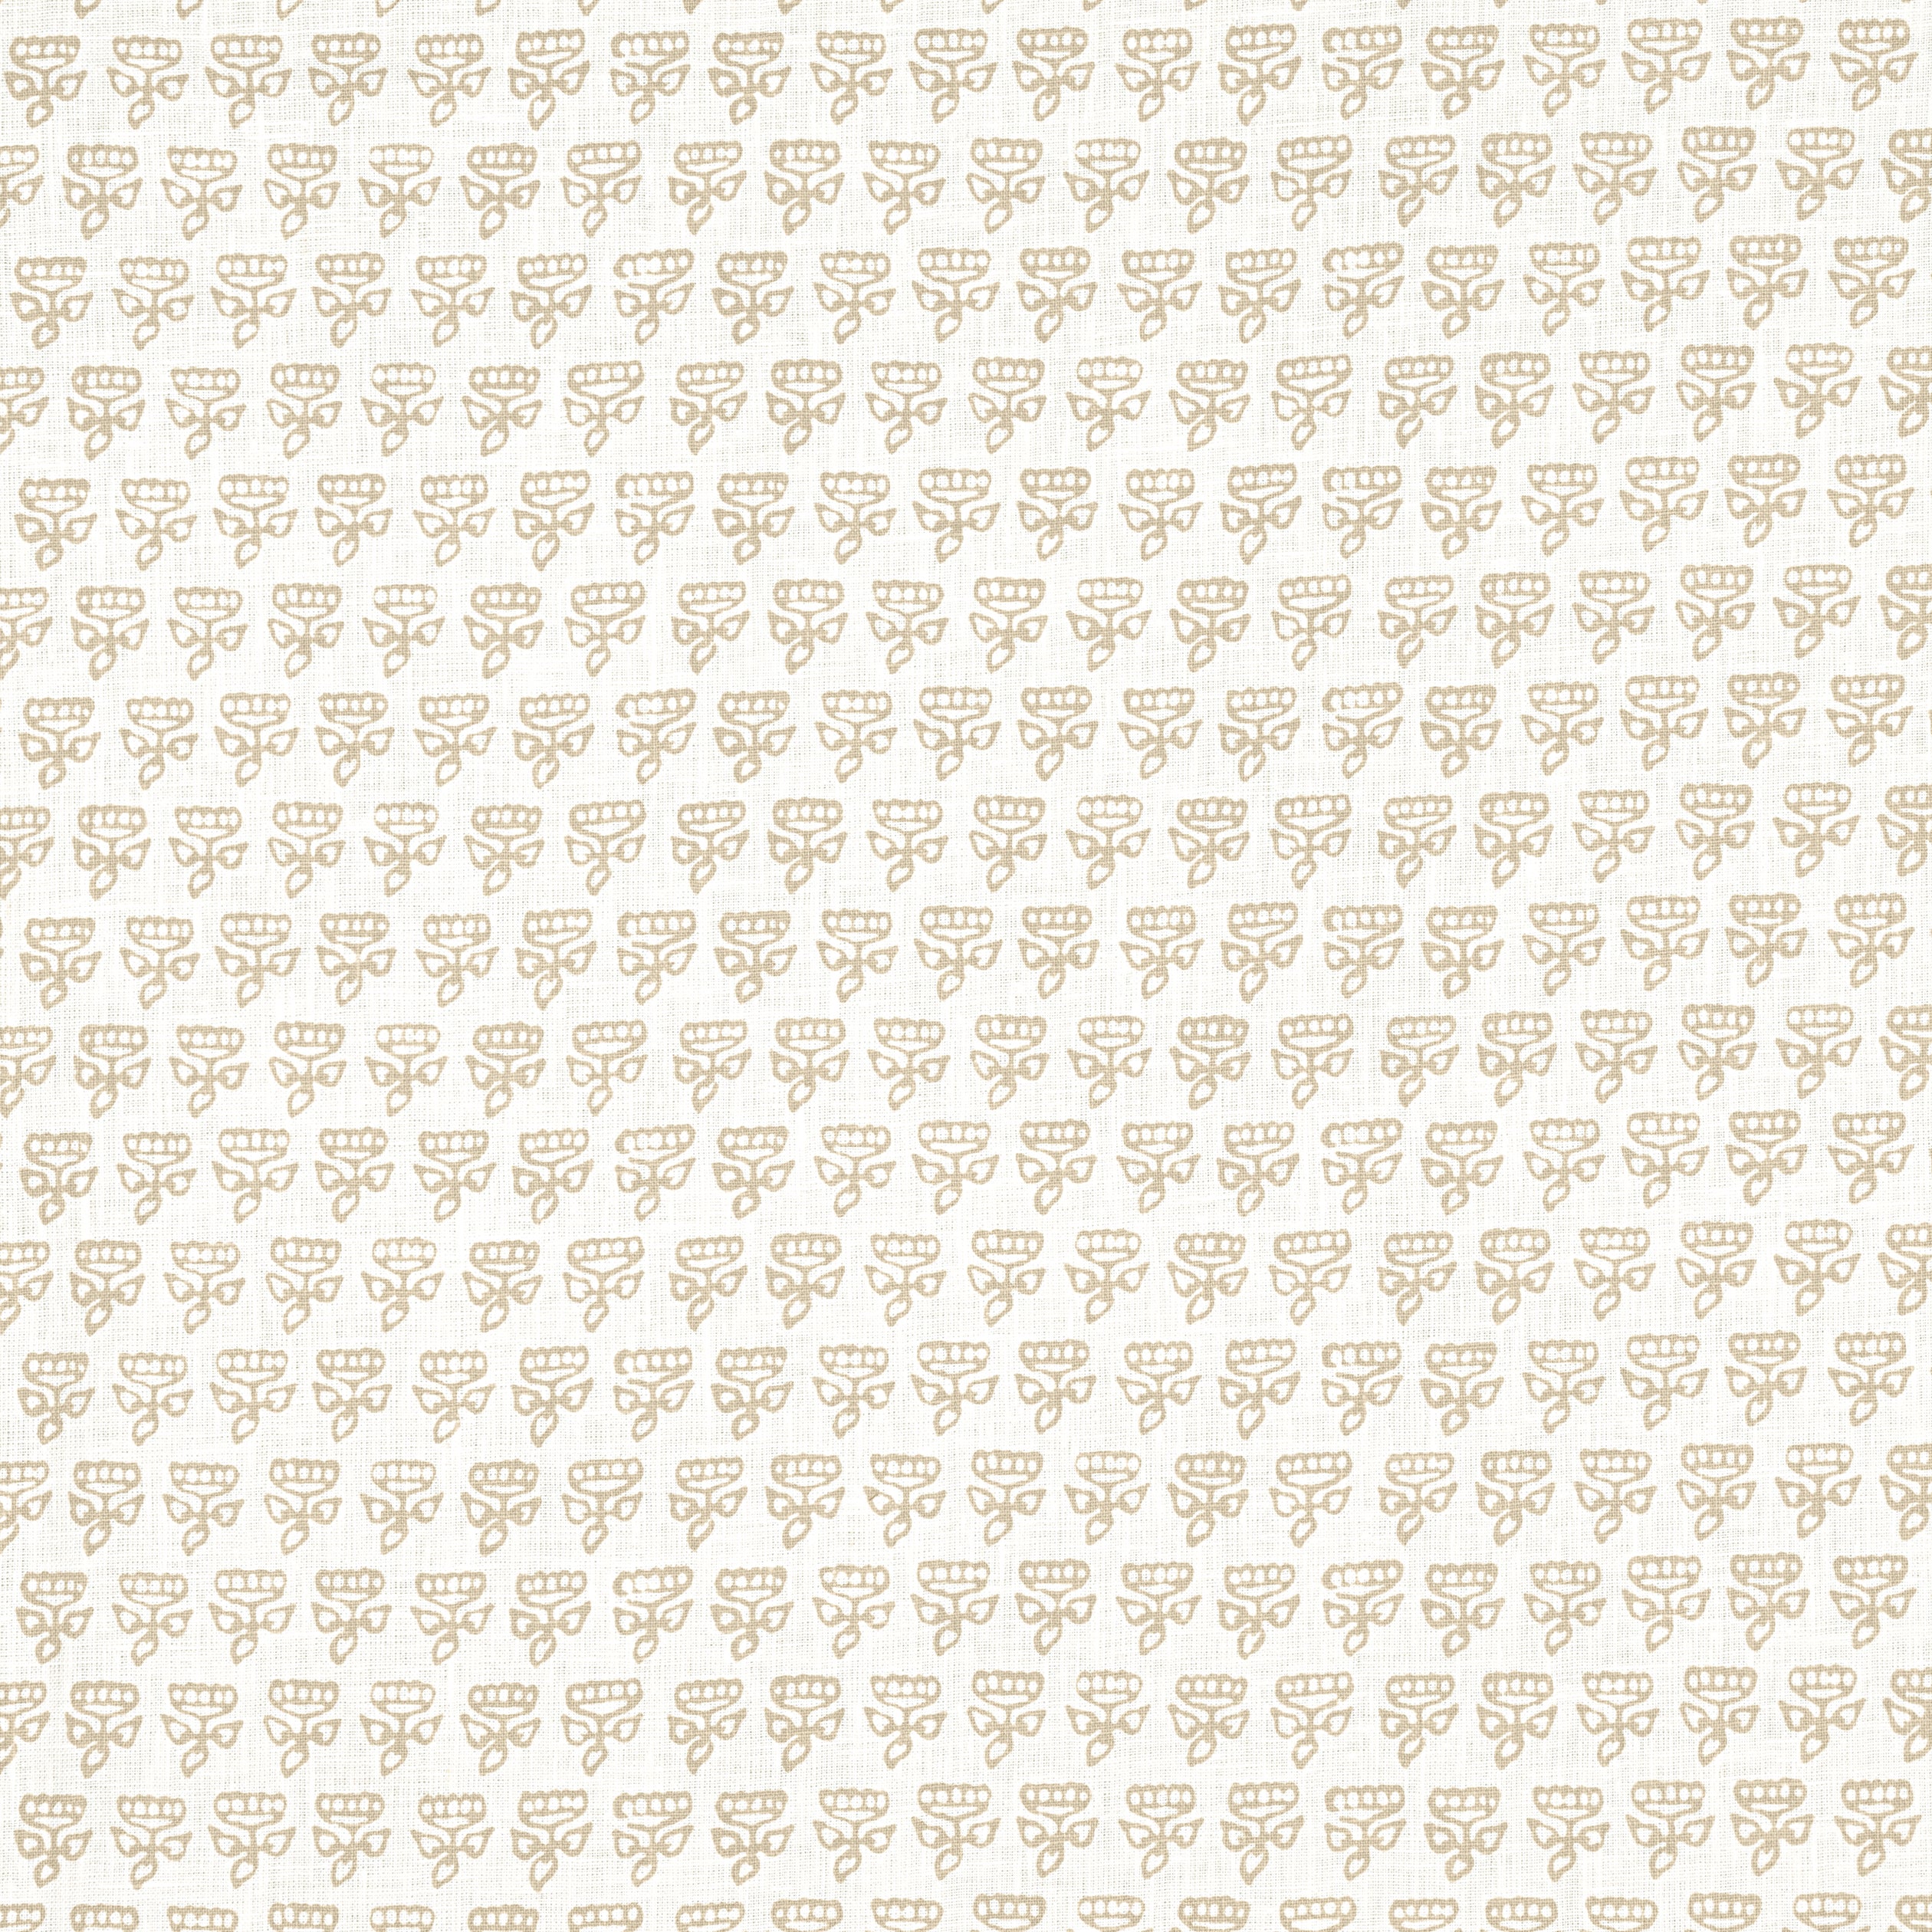 Mimi fabric in beige color - pattern number F936446 - by Thibaut in the Indienne collection